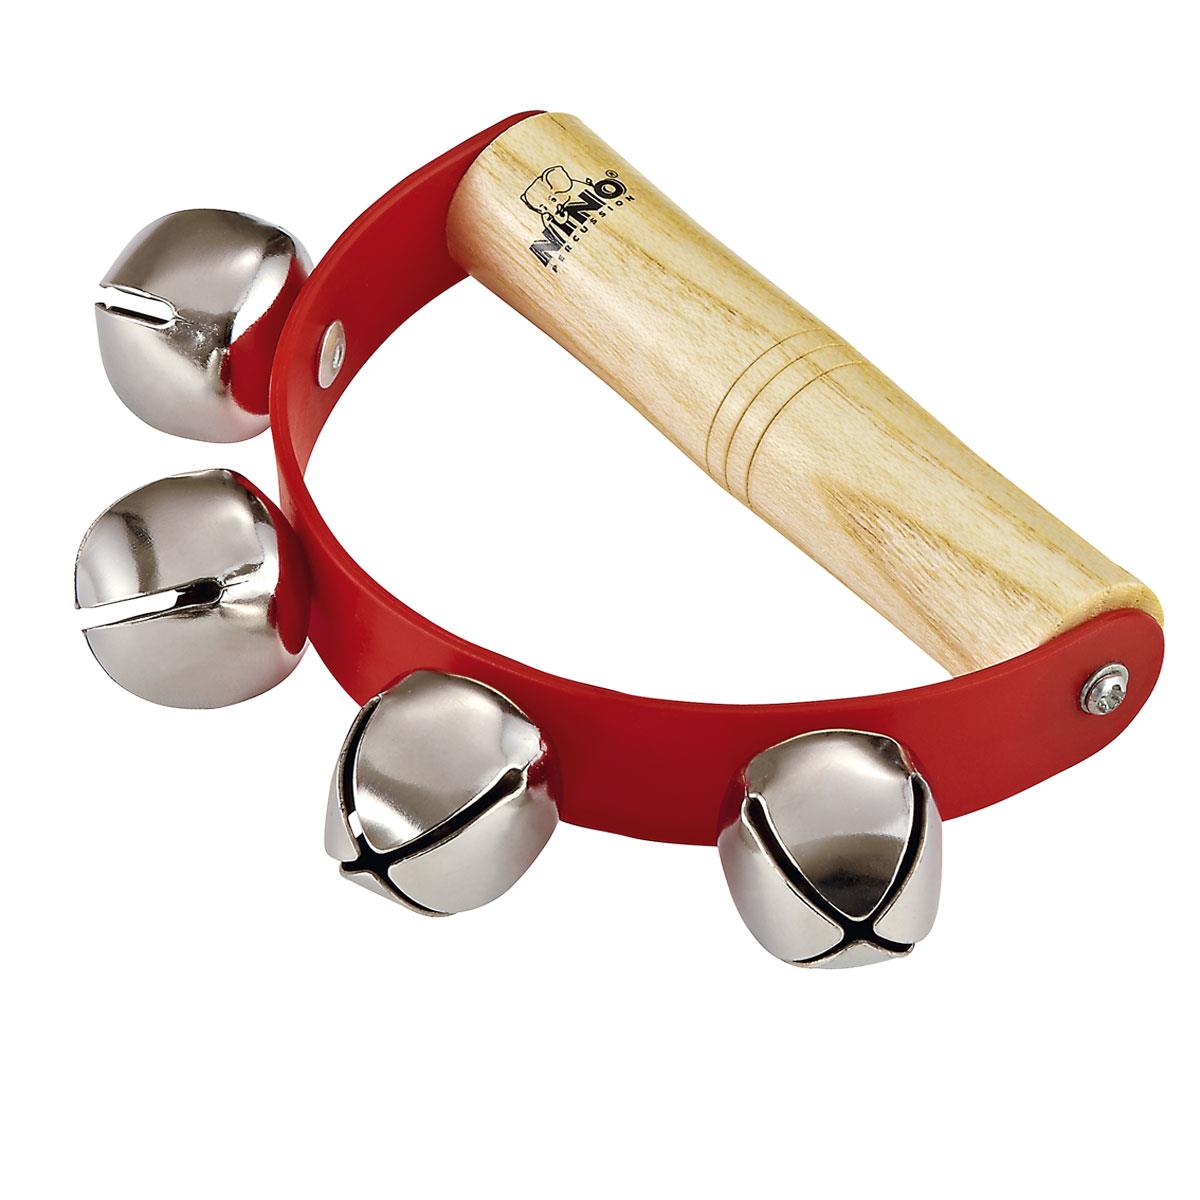 Image of Meinl Sleigh Bells with Wooden Handle